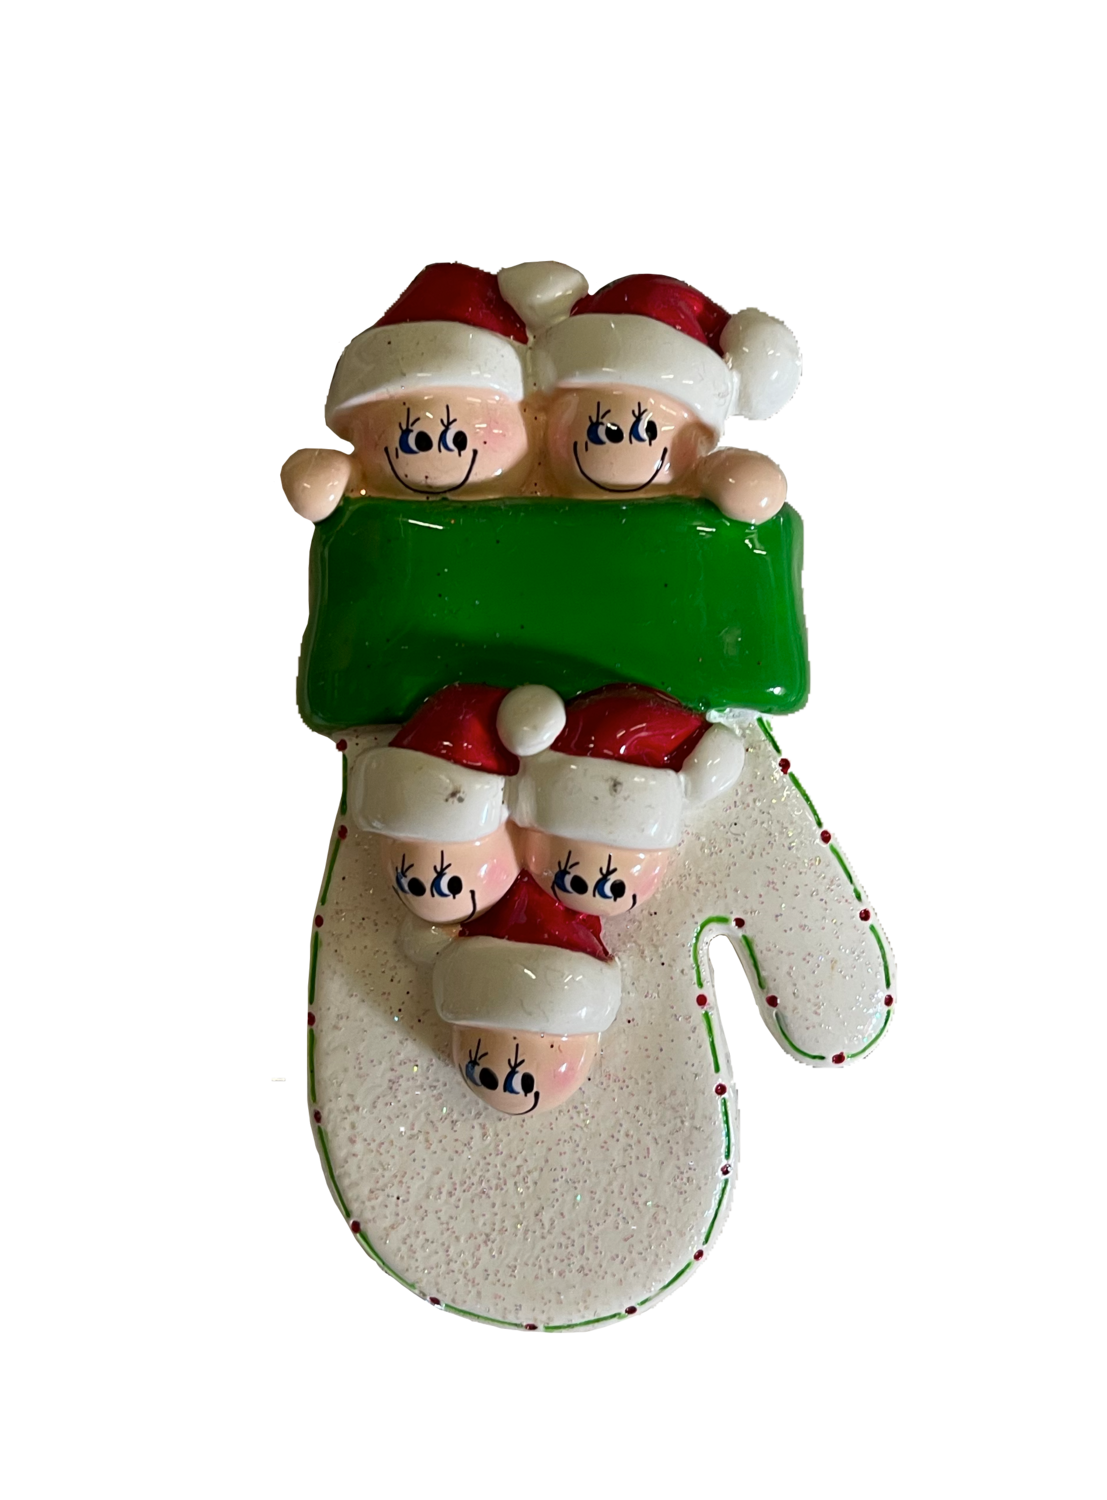 White Mitten Family of Five Christmas Ornament